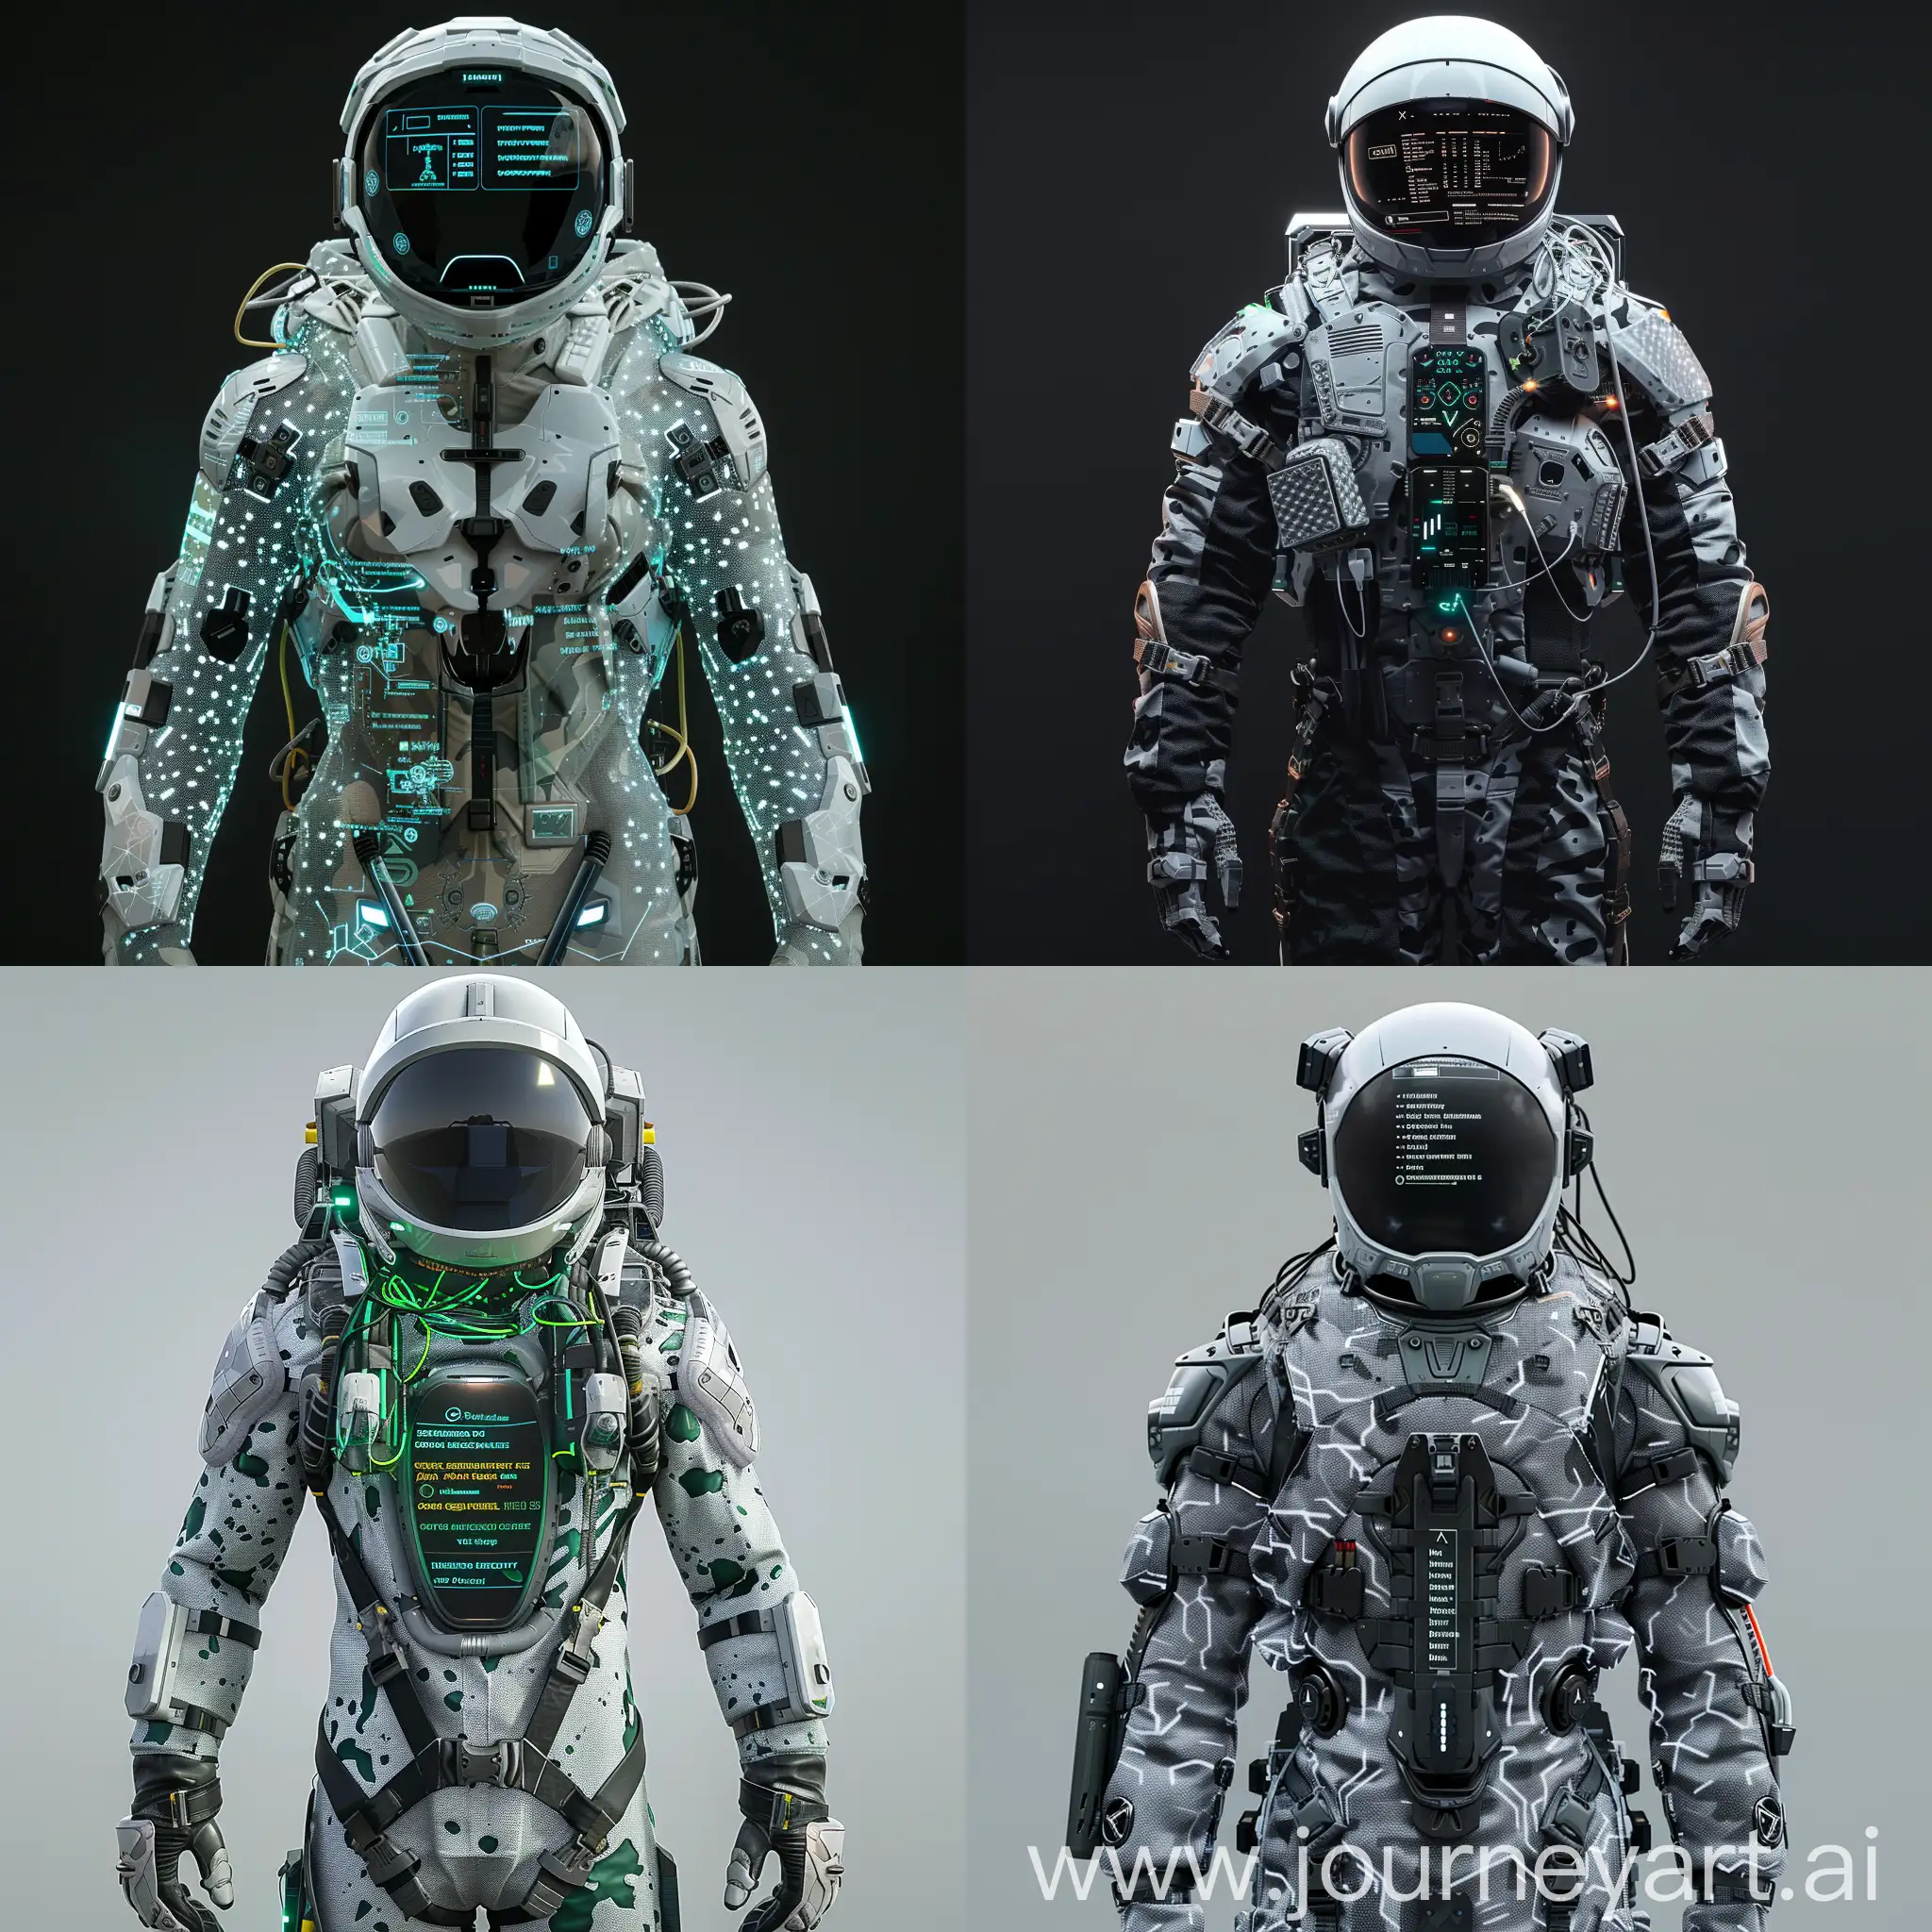 Imaginative futuristic space suit, Integrated Heads-Up Display (HUD), Nanomaterial Fabric, Thermal Regulation System, Hydrophobic Coating, Oxygen Recycling System, AI-Assisted Navigation, Biometric Monitoring, Power-Assisted Mobility, Wireless Communication System, Modular Component Integration, Cloud Data Syncing, Social Media Connectivity, Information Encryption, Big Data Analytics, Machine Learning Algorithms, Haptic Feedback System, Remote Operability, Virtual Reality Training Modules, User Interface Customization, Cybersecurity Measures, Adaptive Camouflage Skin, Solar Panel Scales, Water Jet Propulsion, Multi-Tool Appendages, Sensory Enhancement Fins, Emergency Flotation Devices, LED Communication Signals, Reinforced Exoskeleton, Environmental Sampling Pods, Global Positioning Interface, Data Streaming Fins, Blockchain-Enabled Identification, IoT Connectivity, Augmented Reality Visor, Peer-to-Peer Network Nodes, Crowdsourced Navigation Maps, Wireless Charging Stations, Open-Source Hardware Interfaces, Cyber-Physical System Integration, unreal engine 5 --stylize 1000